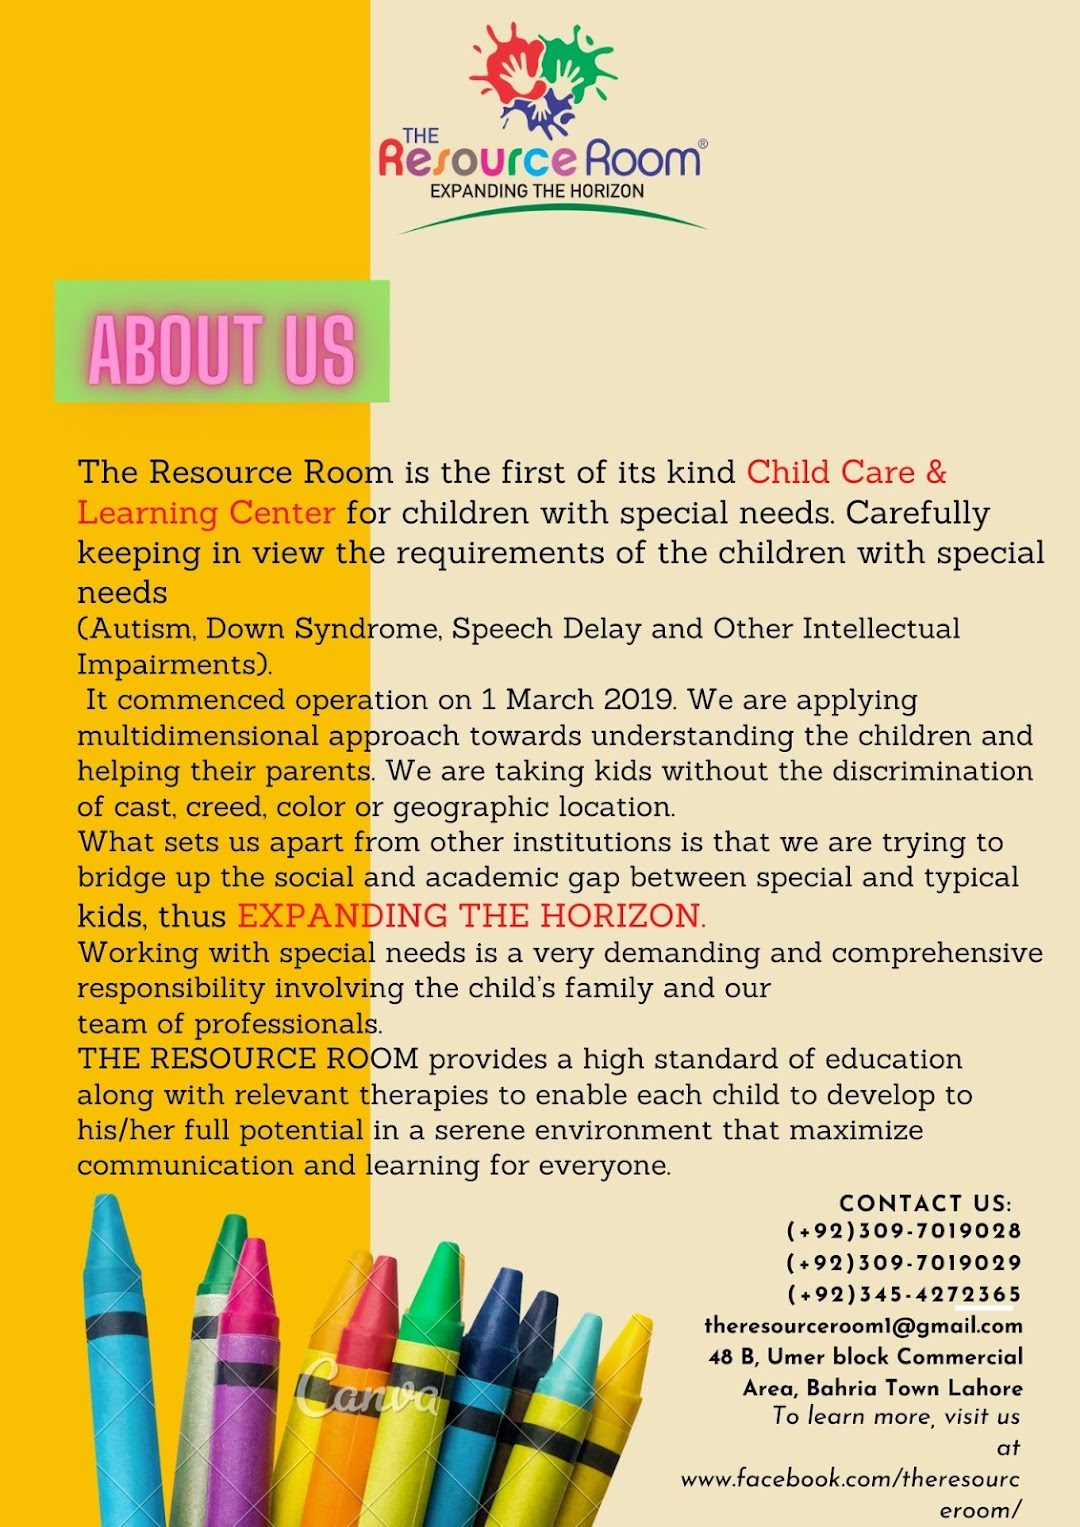 The Resource Room - Child Care & Learning Center